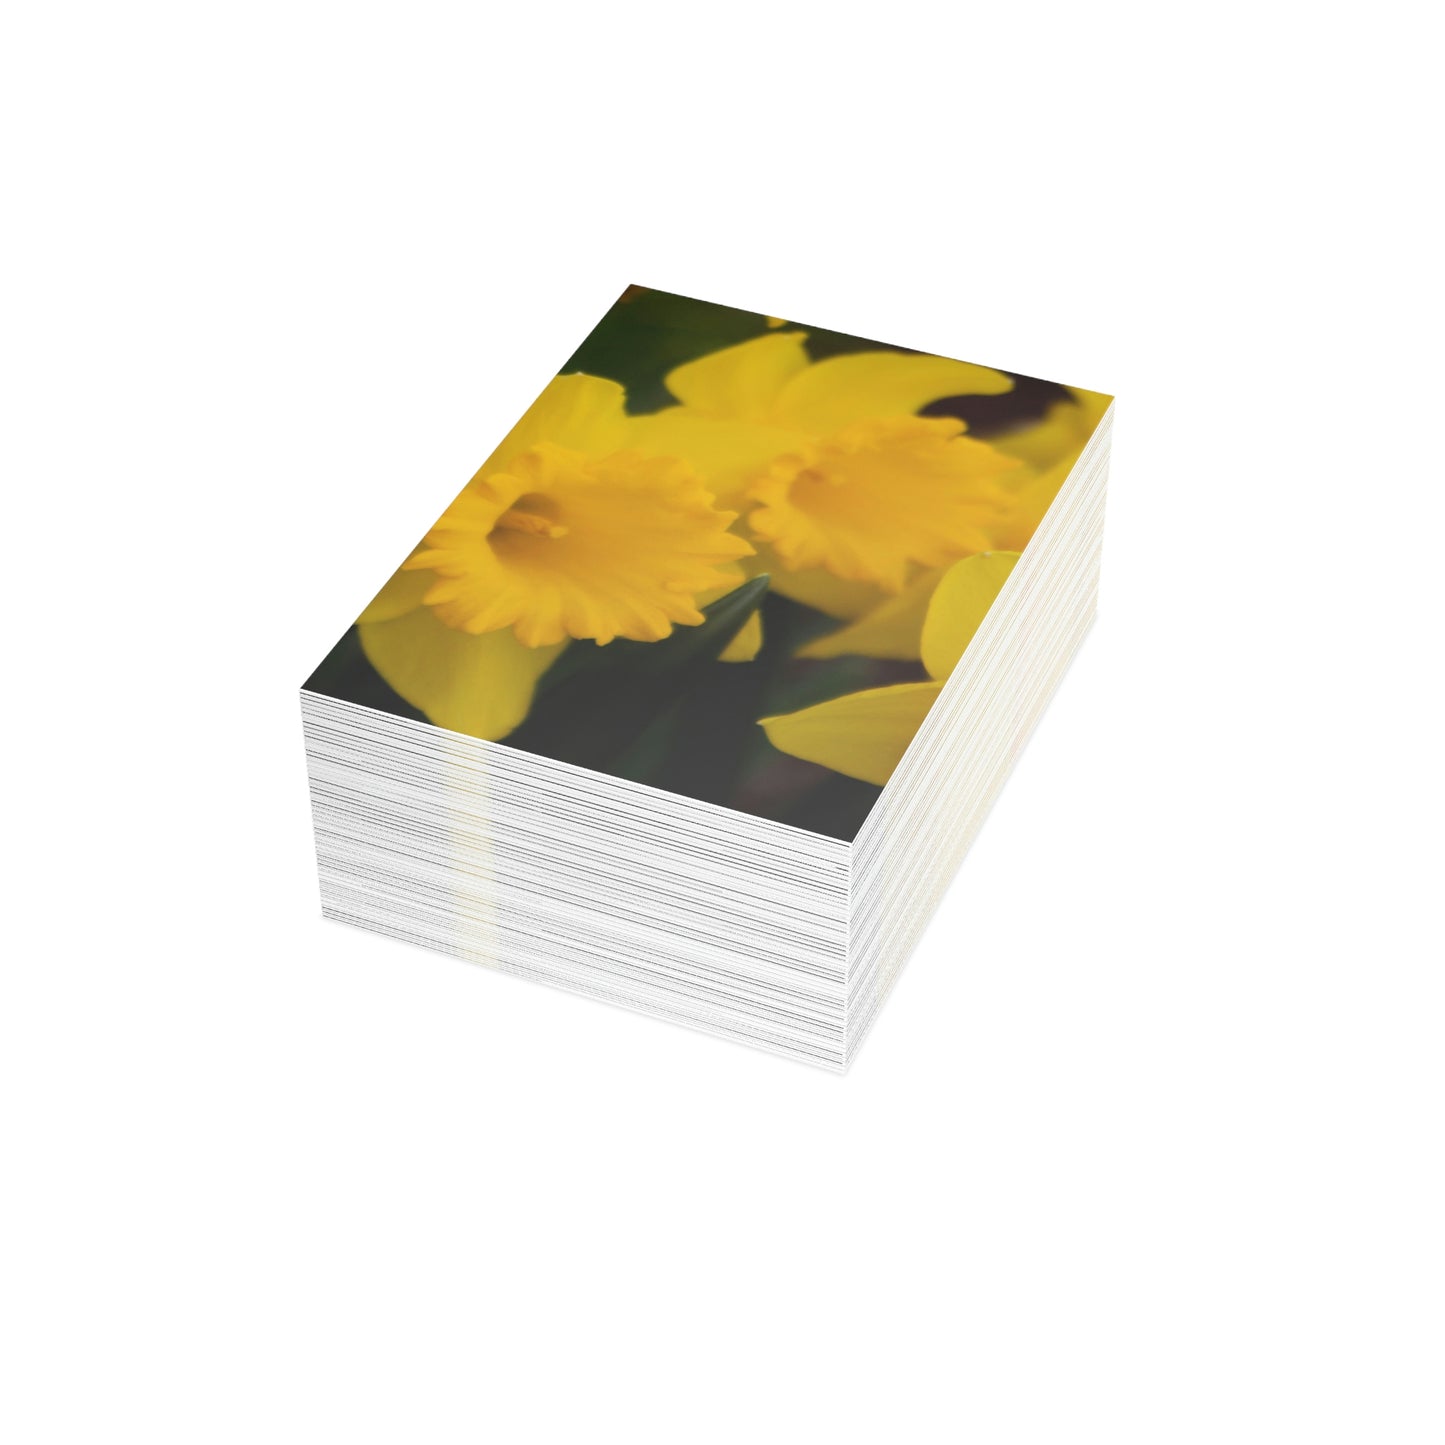 Flowers 08 Greeting Cards (1, 10, 30, and 50pcs)